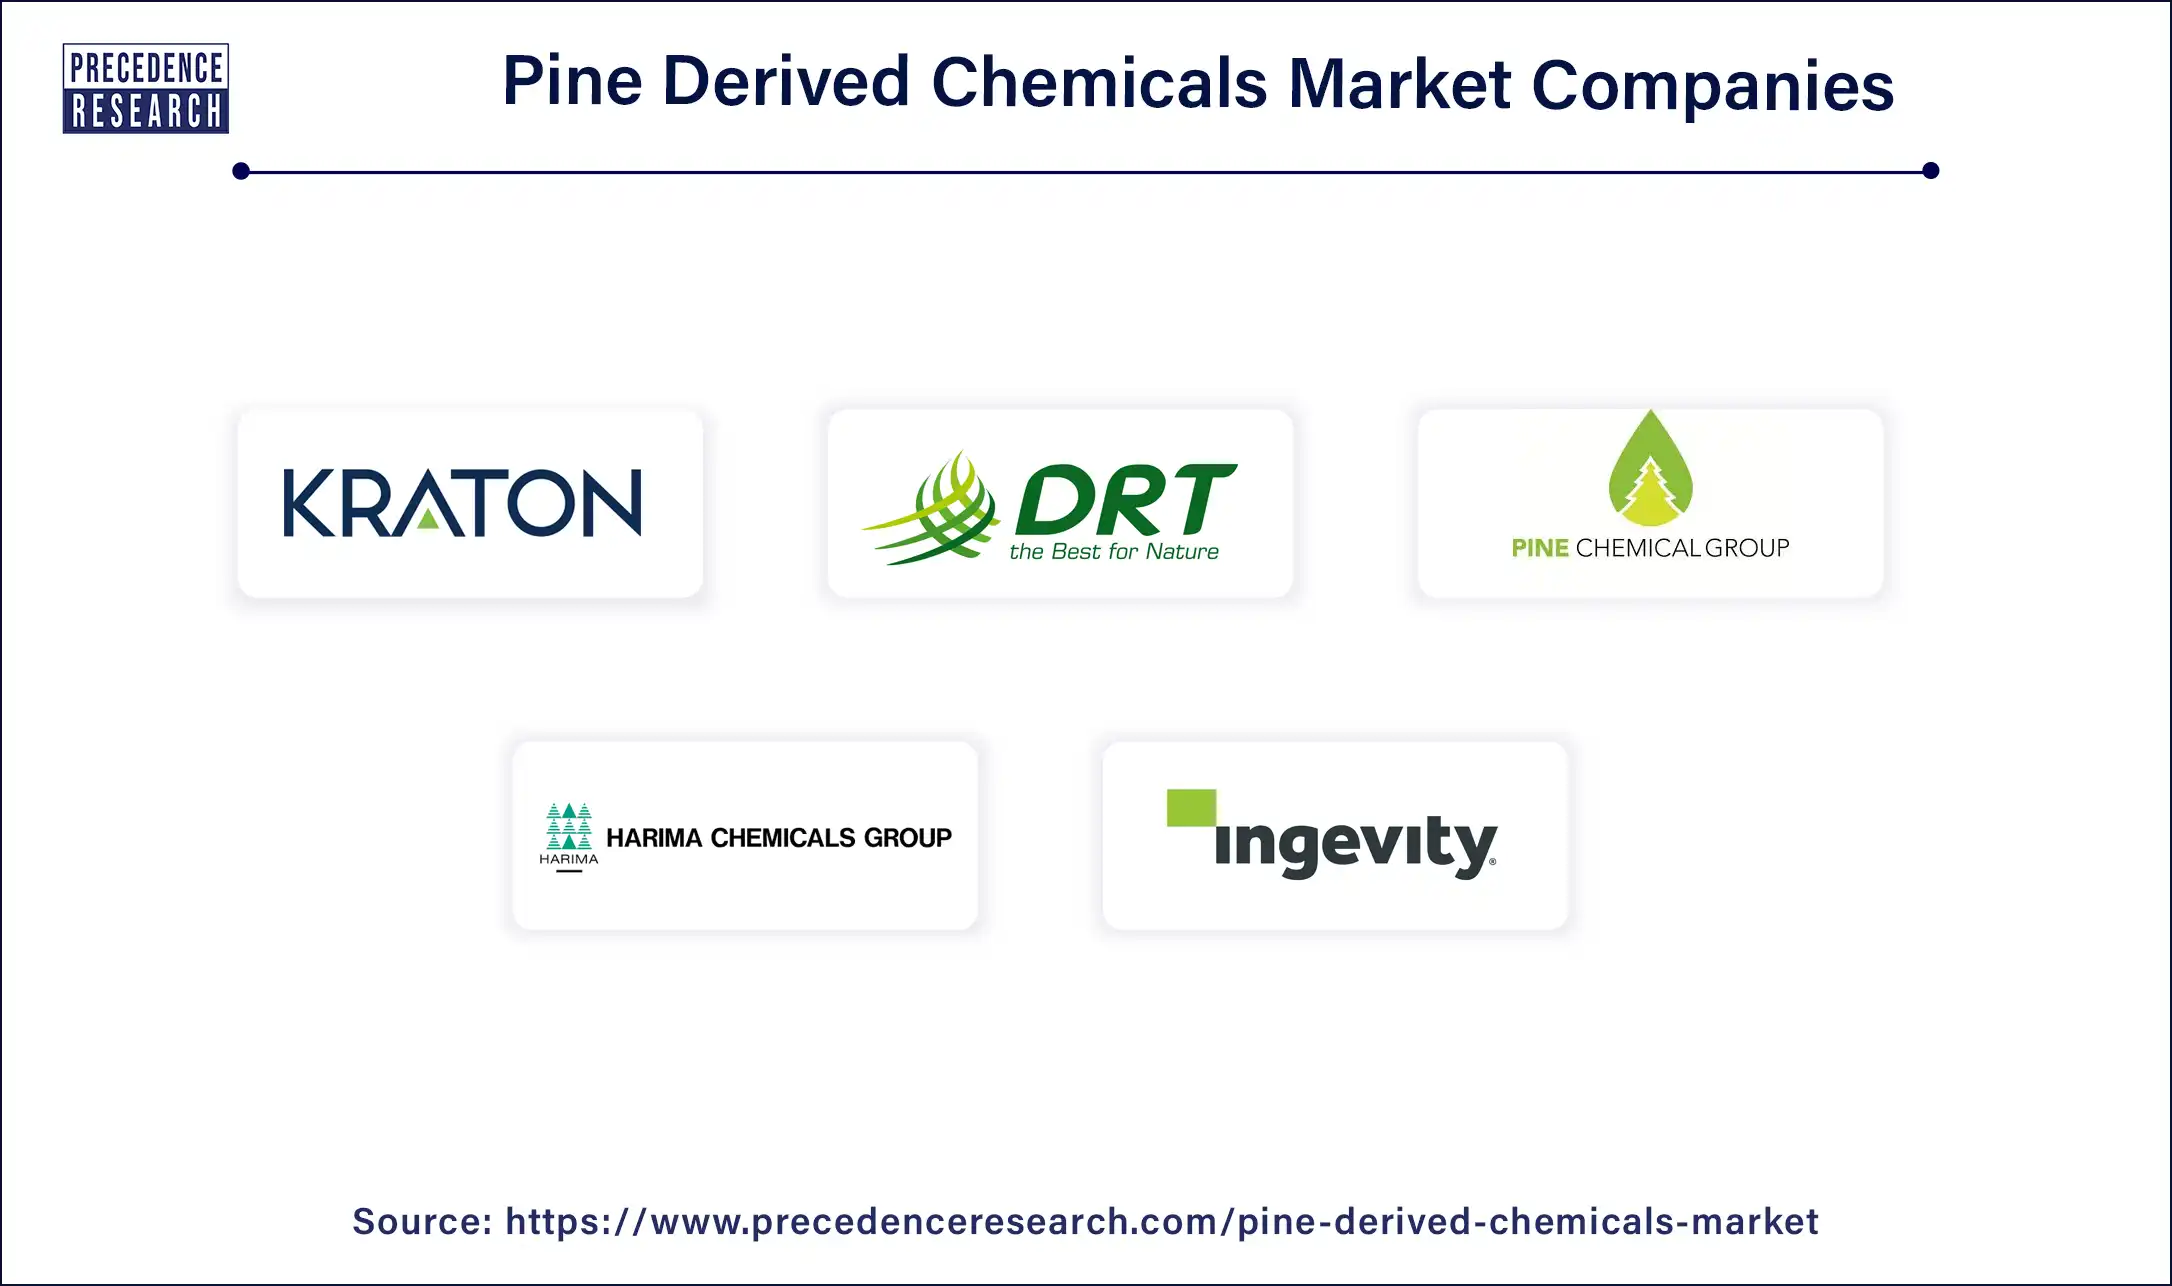 Pine Derived Chemicals Companies